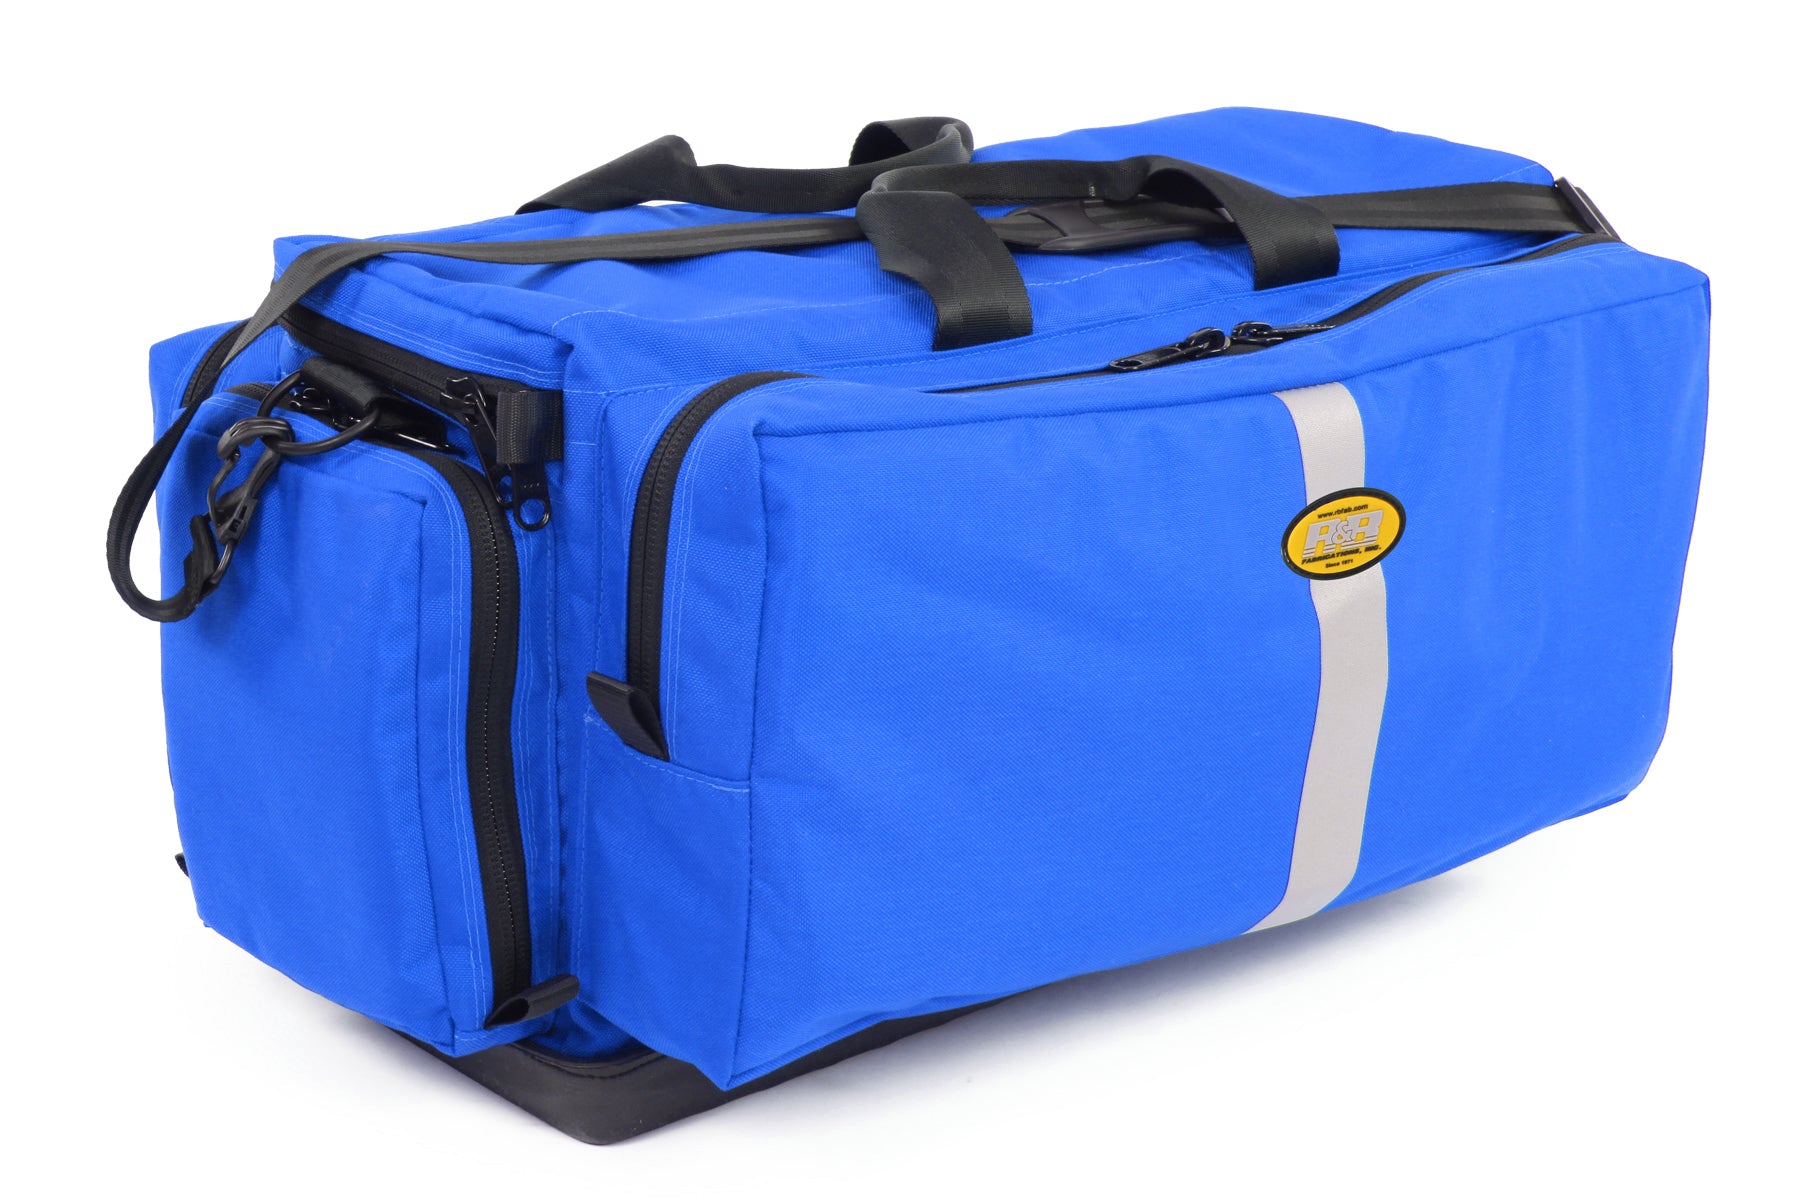 Mega Medic's Bag With O2 Straps and Padded Inserts